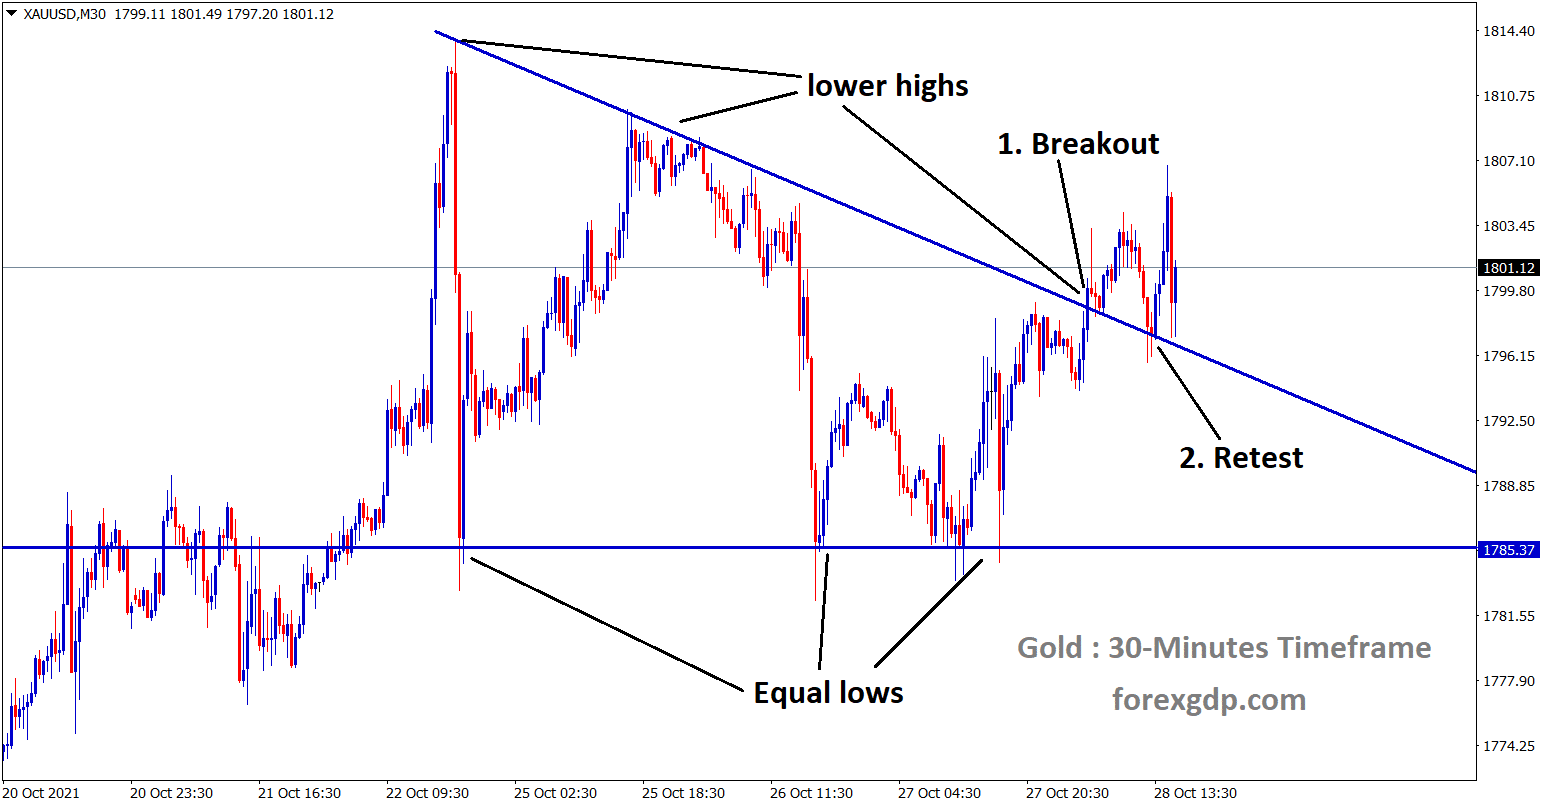 XAUUSD Gold price has broken the top lower high of the descending triangle pattern and now market has retested the broken level